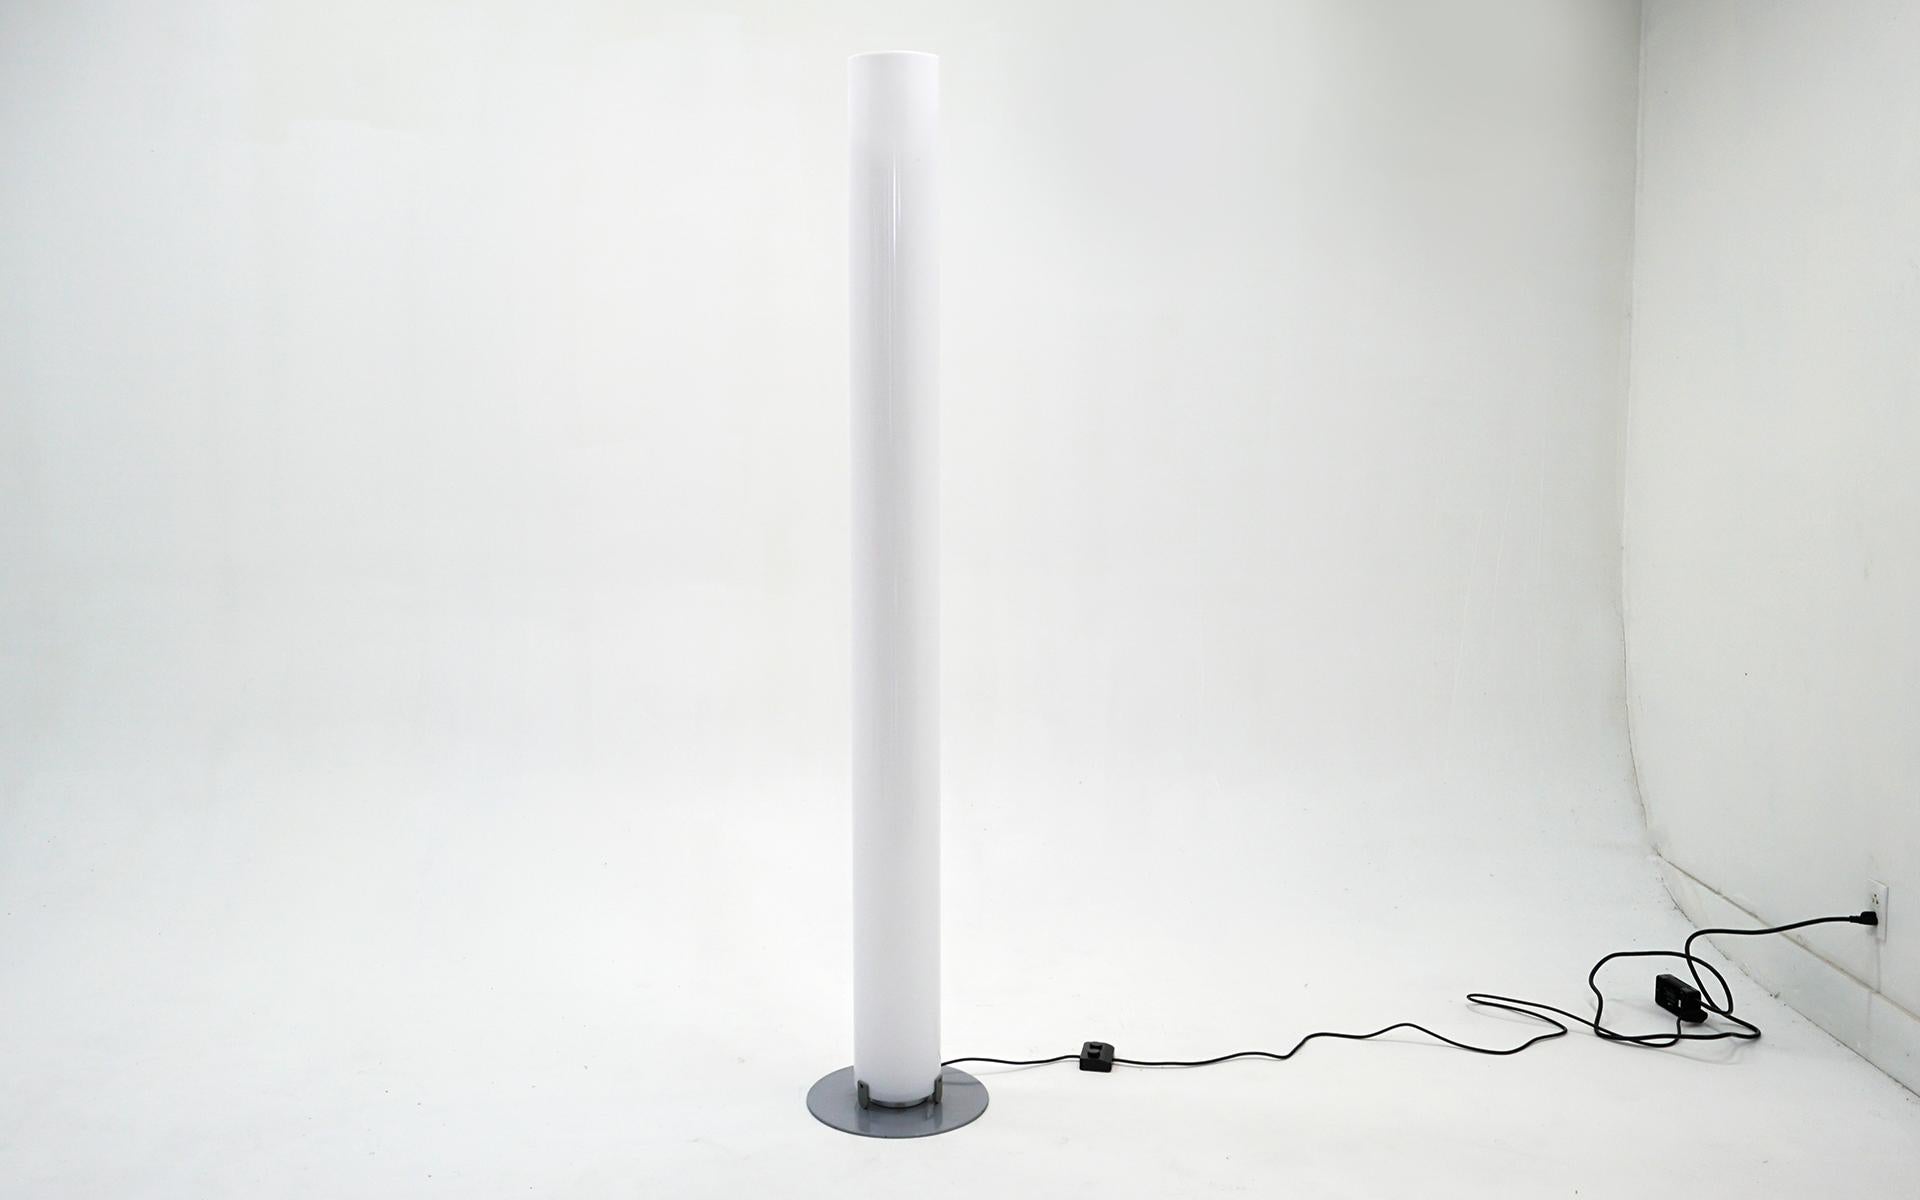 Stylos floor lamp designed by Achille Castiglioni for Flos, Italy in 1984. The lower lamp illuminates the column at the base. and the upper bulb provides additional diffused lighting that emits through the top. Each bulb has a separate switch